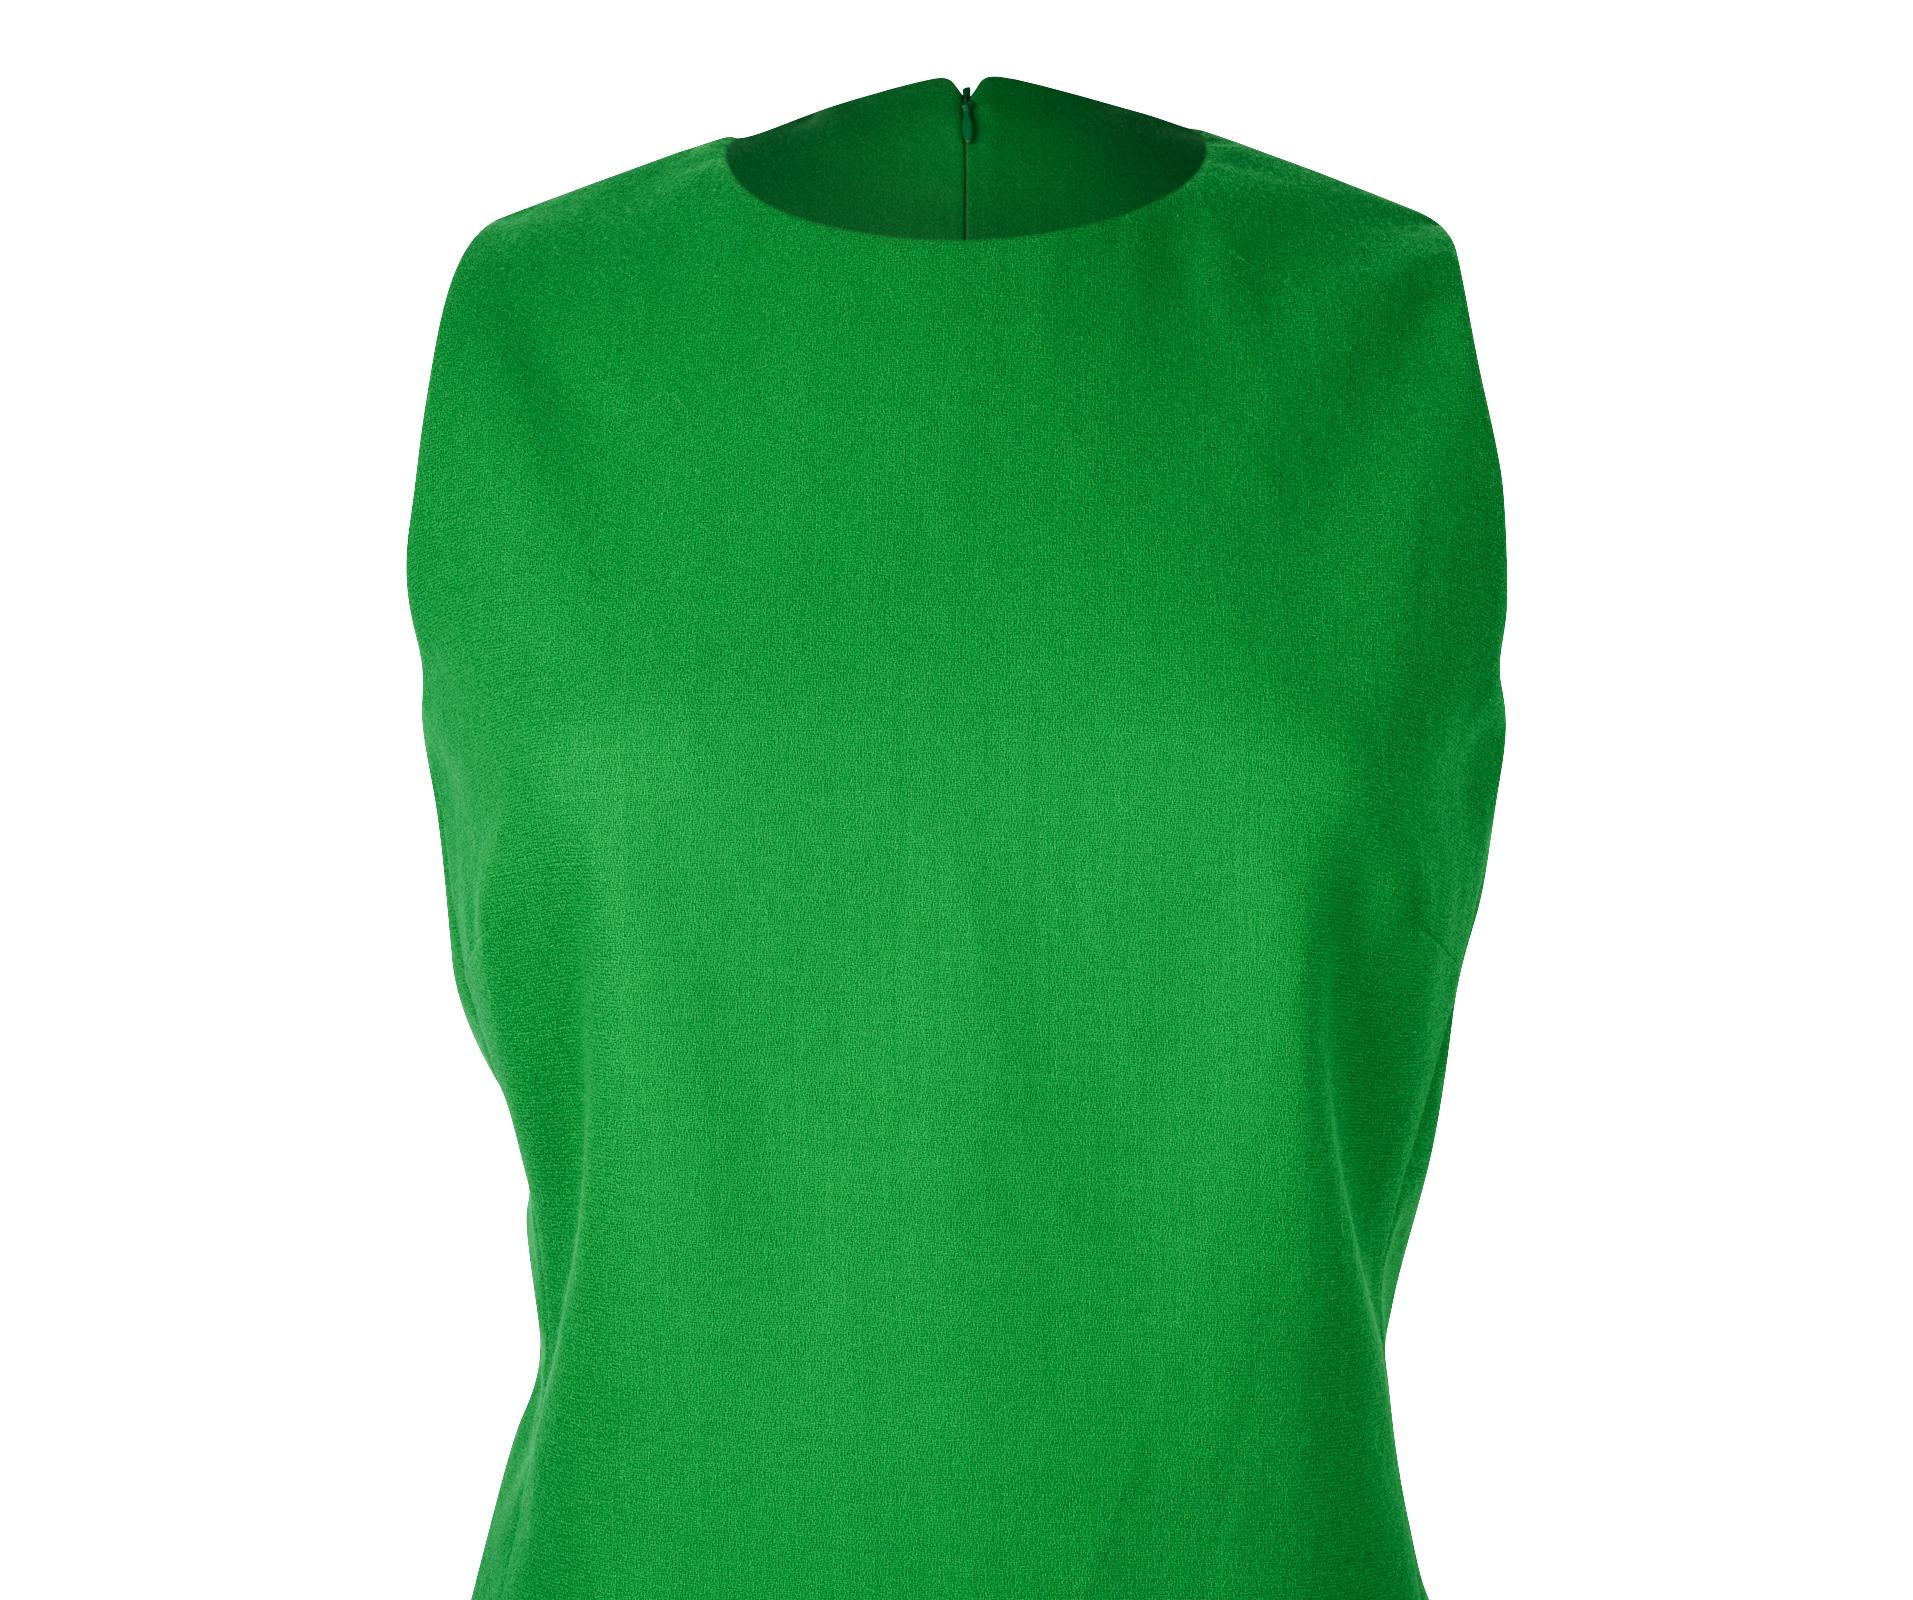 Women's Christian Dior Top Emerald Green Sleeveless Shaped and Fitted fits 8